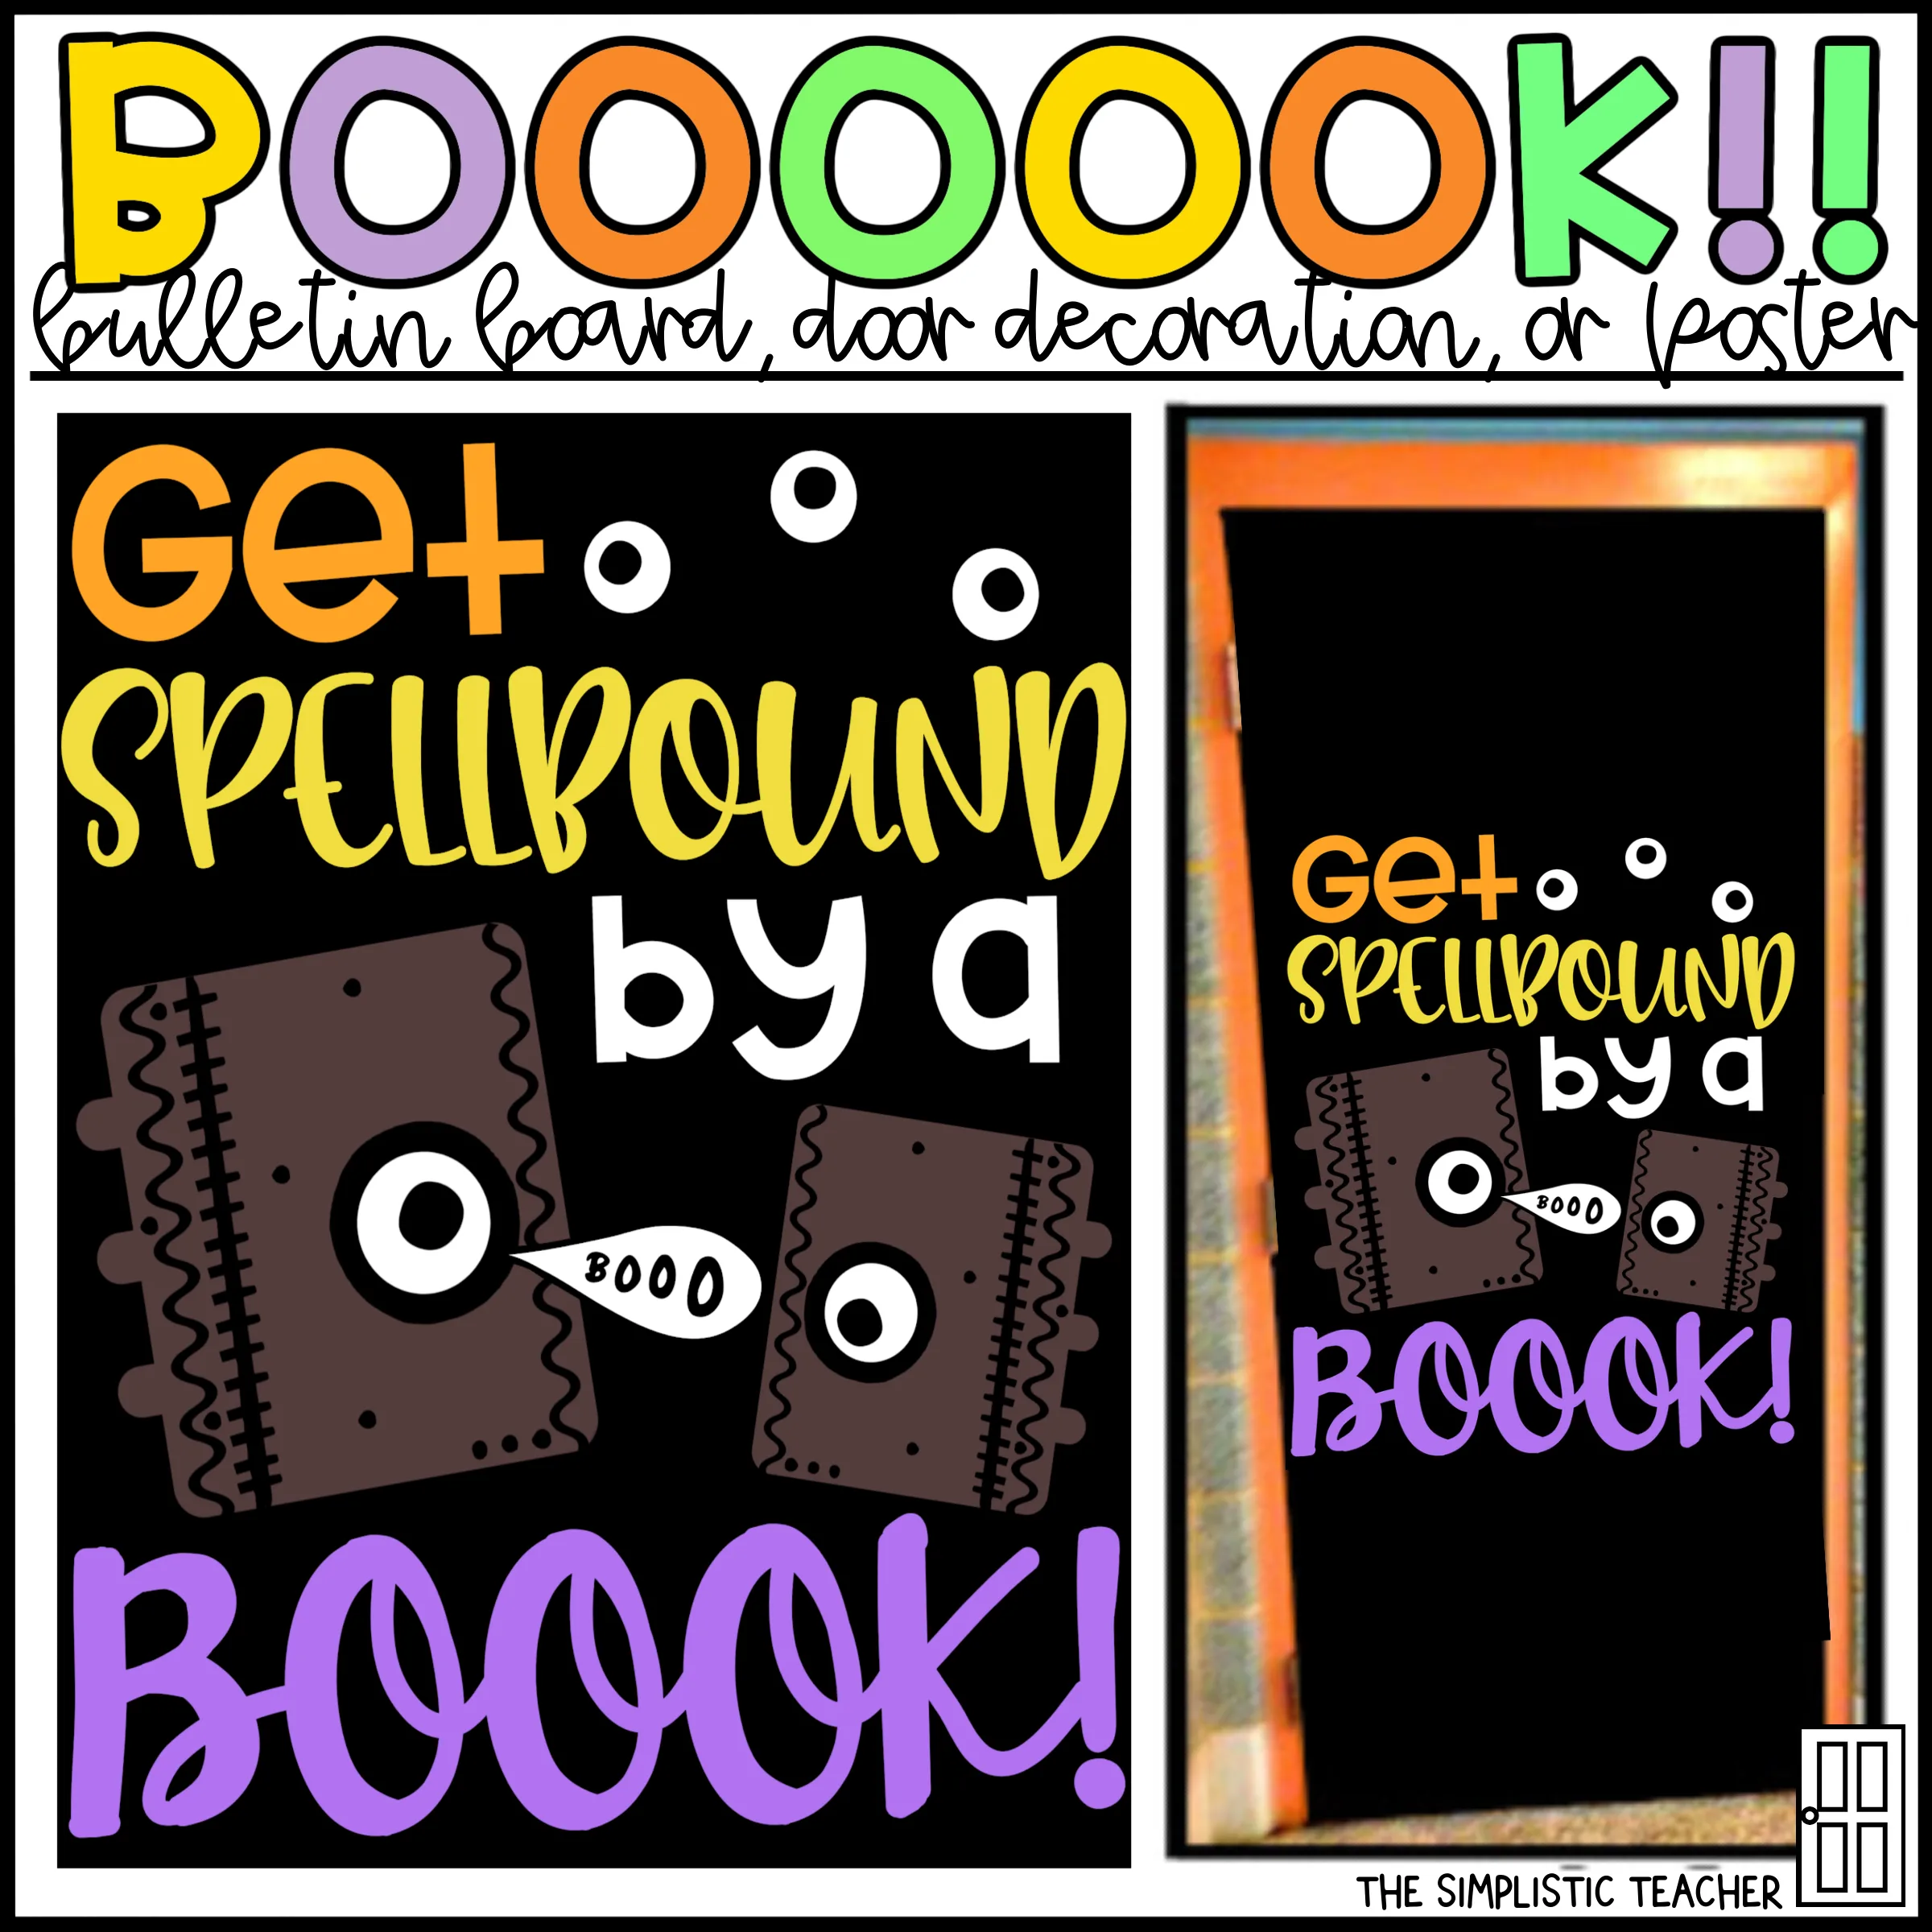 An educational teaching resource from The Simplistic Teacher entitled "Hocus Pocus" Boook! Fall Reading Bulletin Board Kit, Door Decoration Set, or Poster downloadable at Teach Simple.